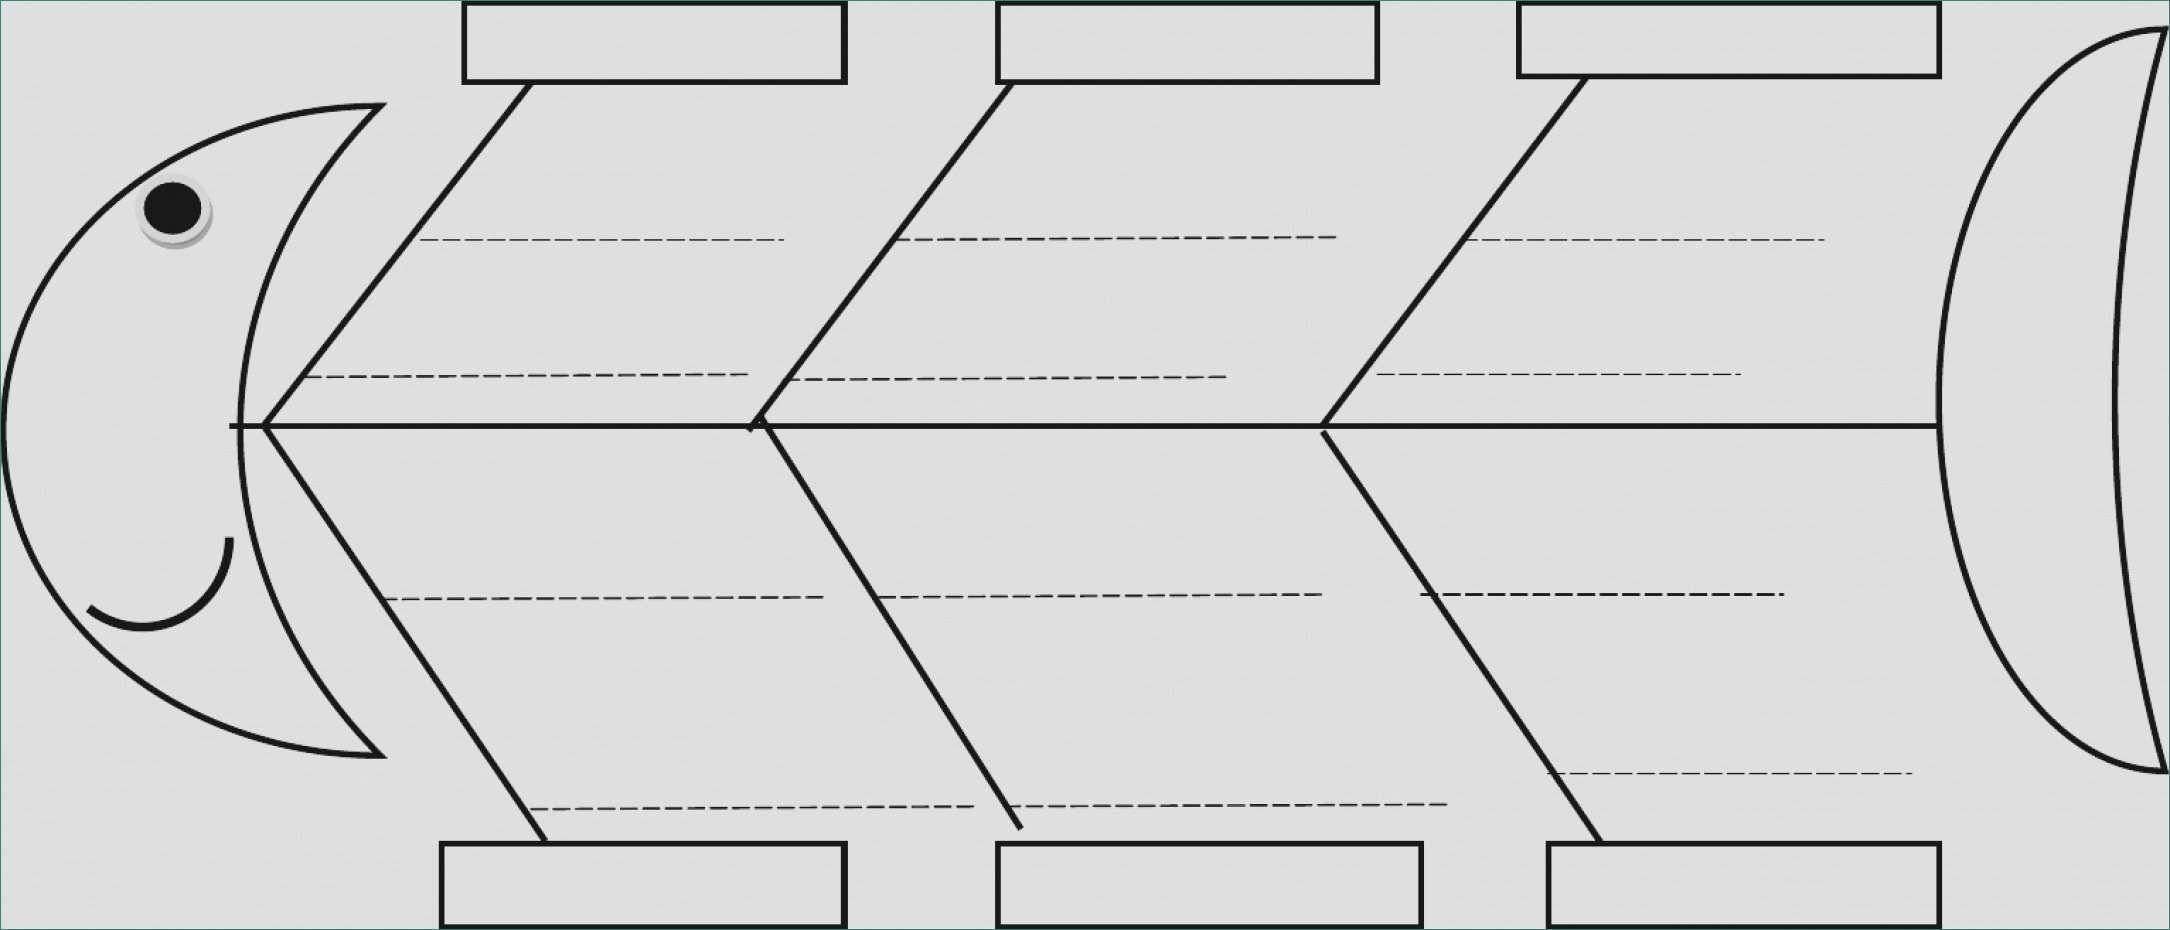 Blank Fishbone Diagram Template Blank Cause and Effect Diagram